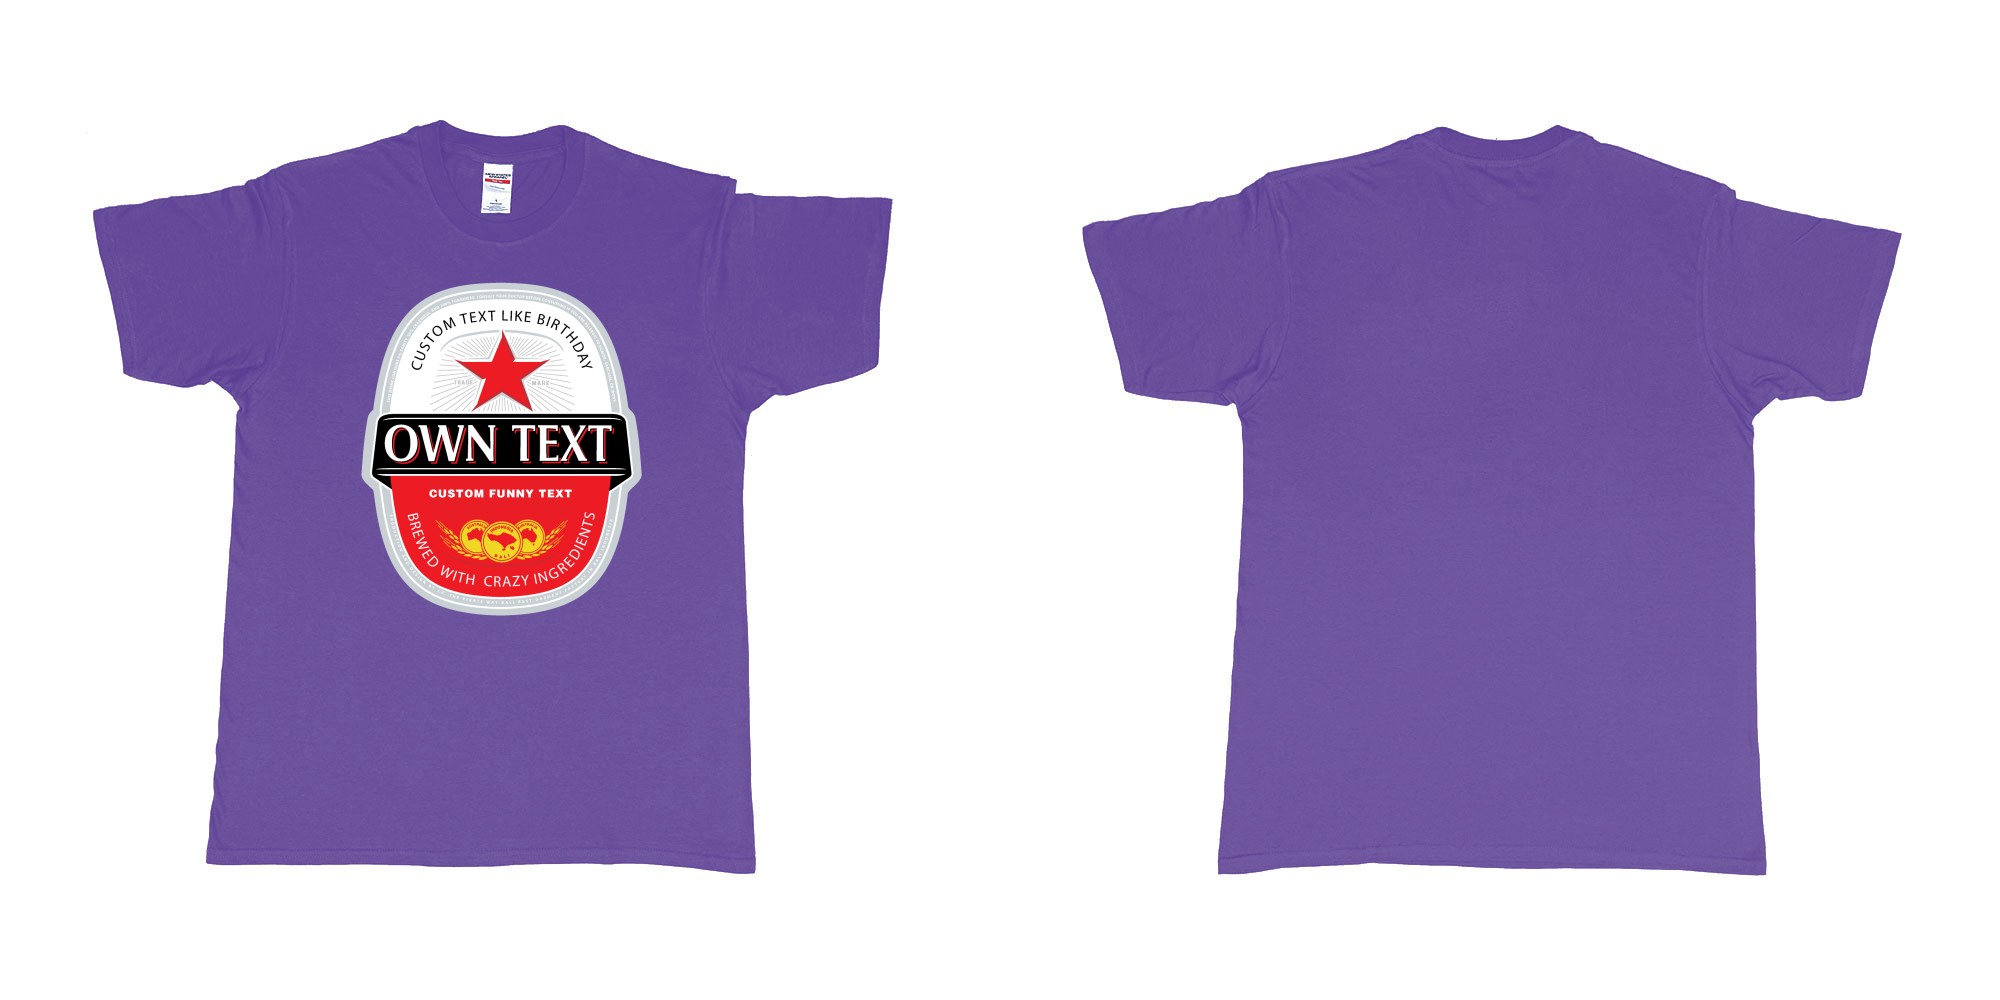 Custom tshirt design beer bintang large label in fabric color purple choice your own text made in Bali by The Pirate Way